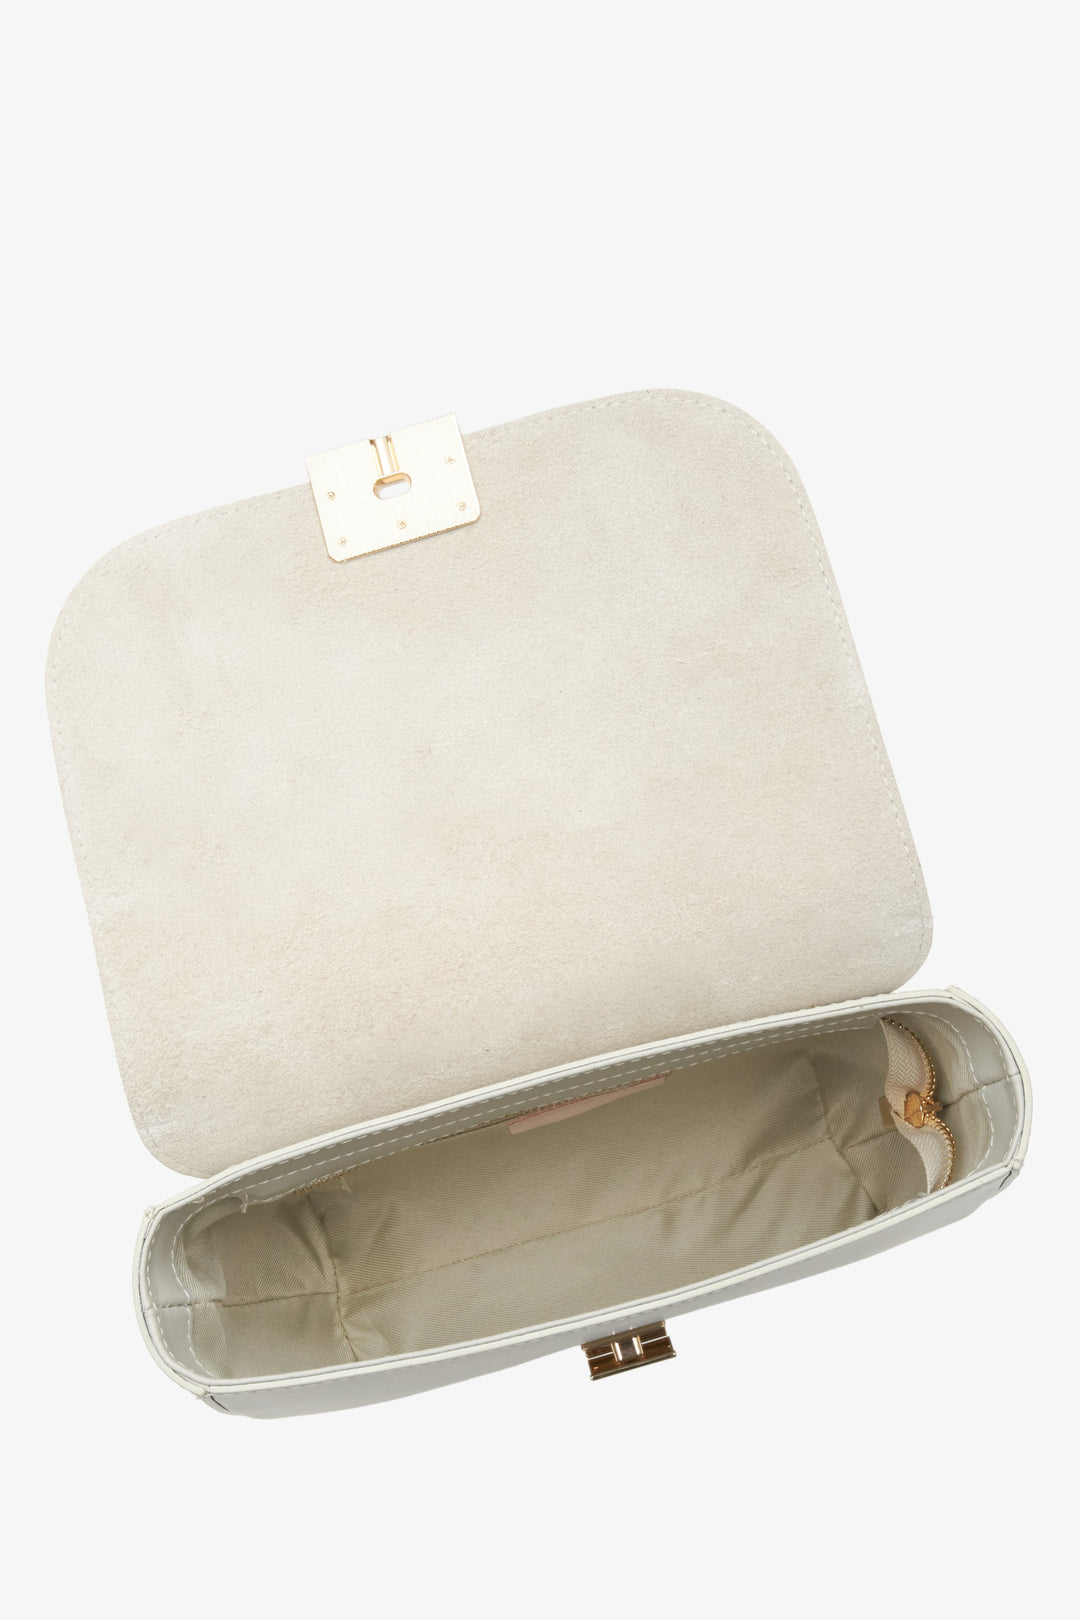  Estro milky-beige crescent-shaped handbag made of Italian genuine leather - close-up on the interior of the model.